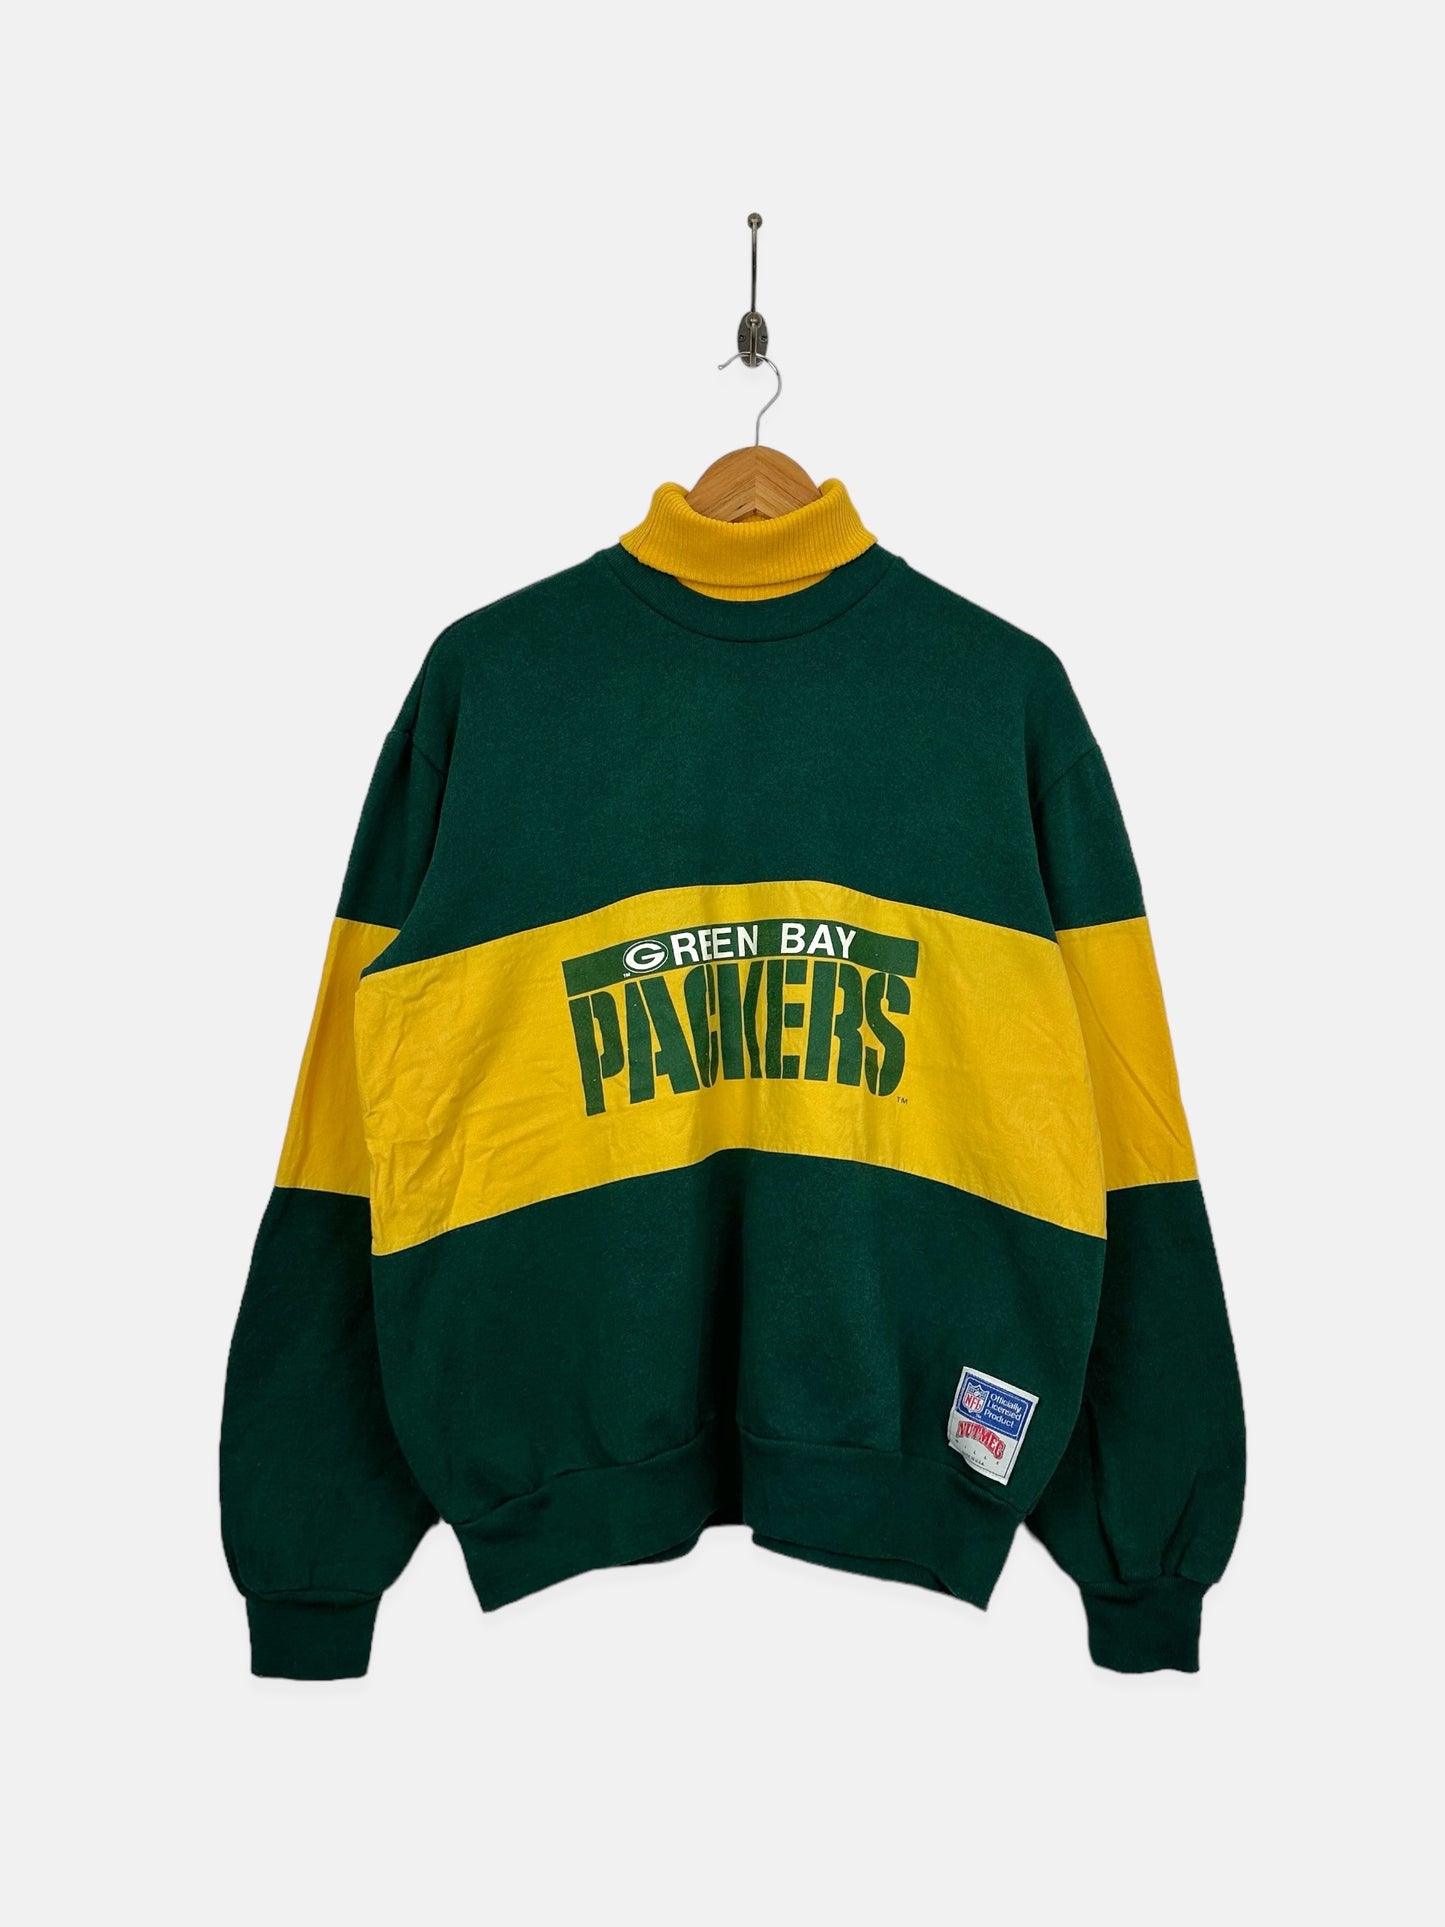 90's Green Bay Packers NFL USA Made Vintage Mock-Neck Sweatshirt Size 10